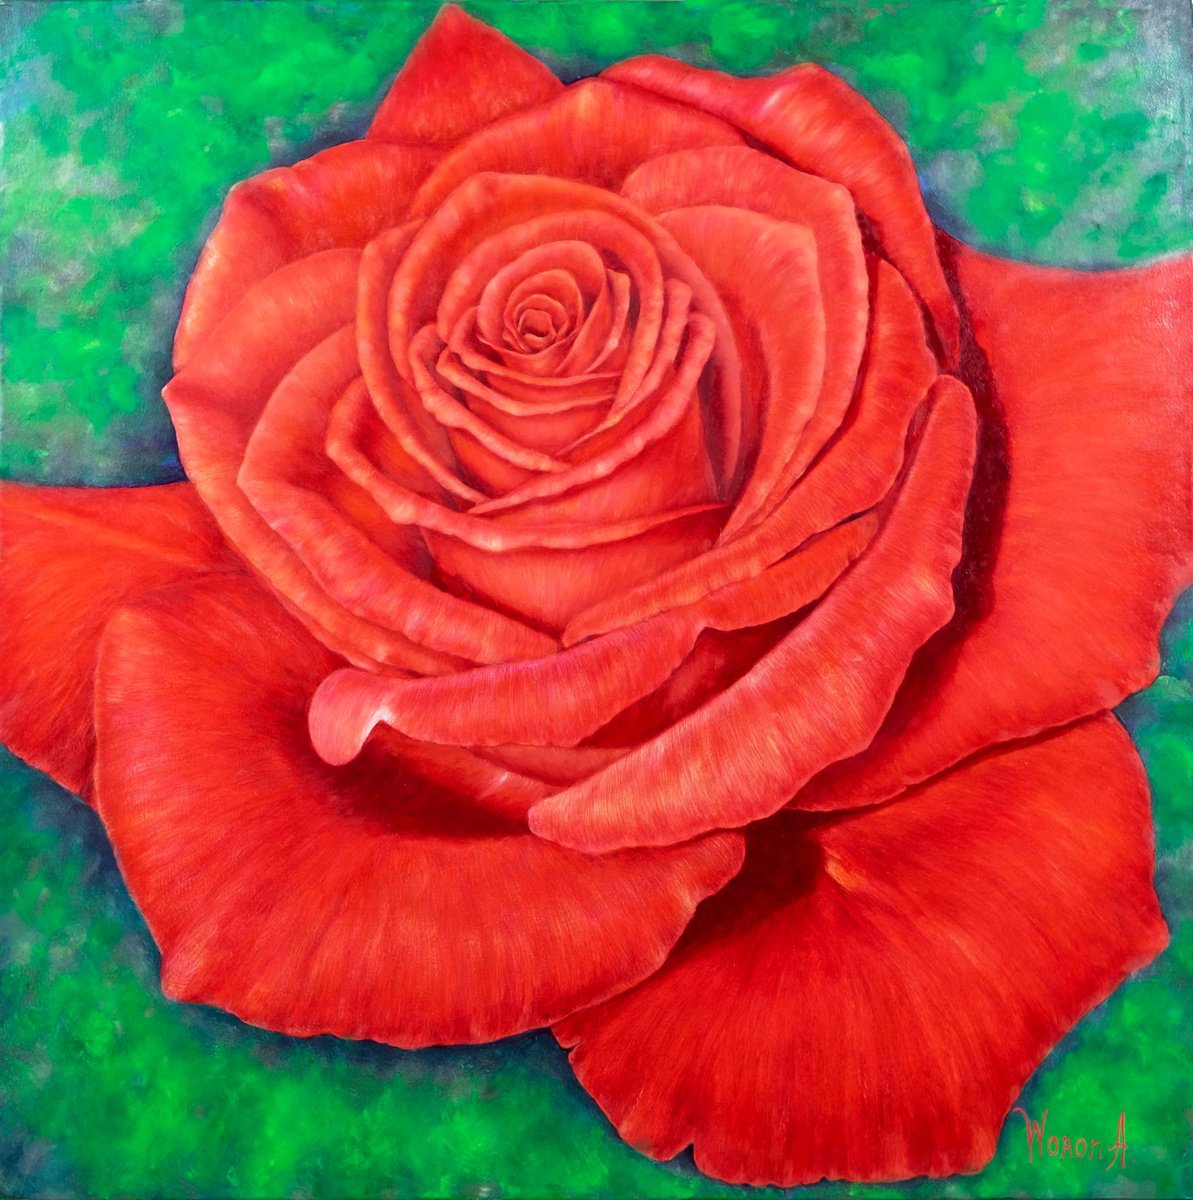 ROSE. PORTRAIT OF THE RED ROSE. by Anastasia Woron